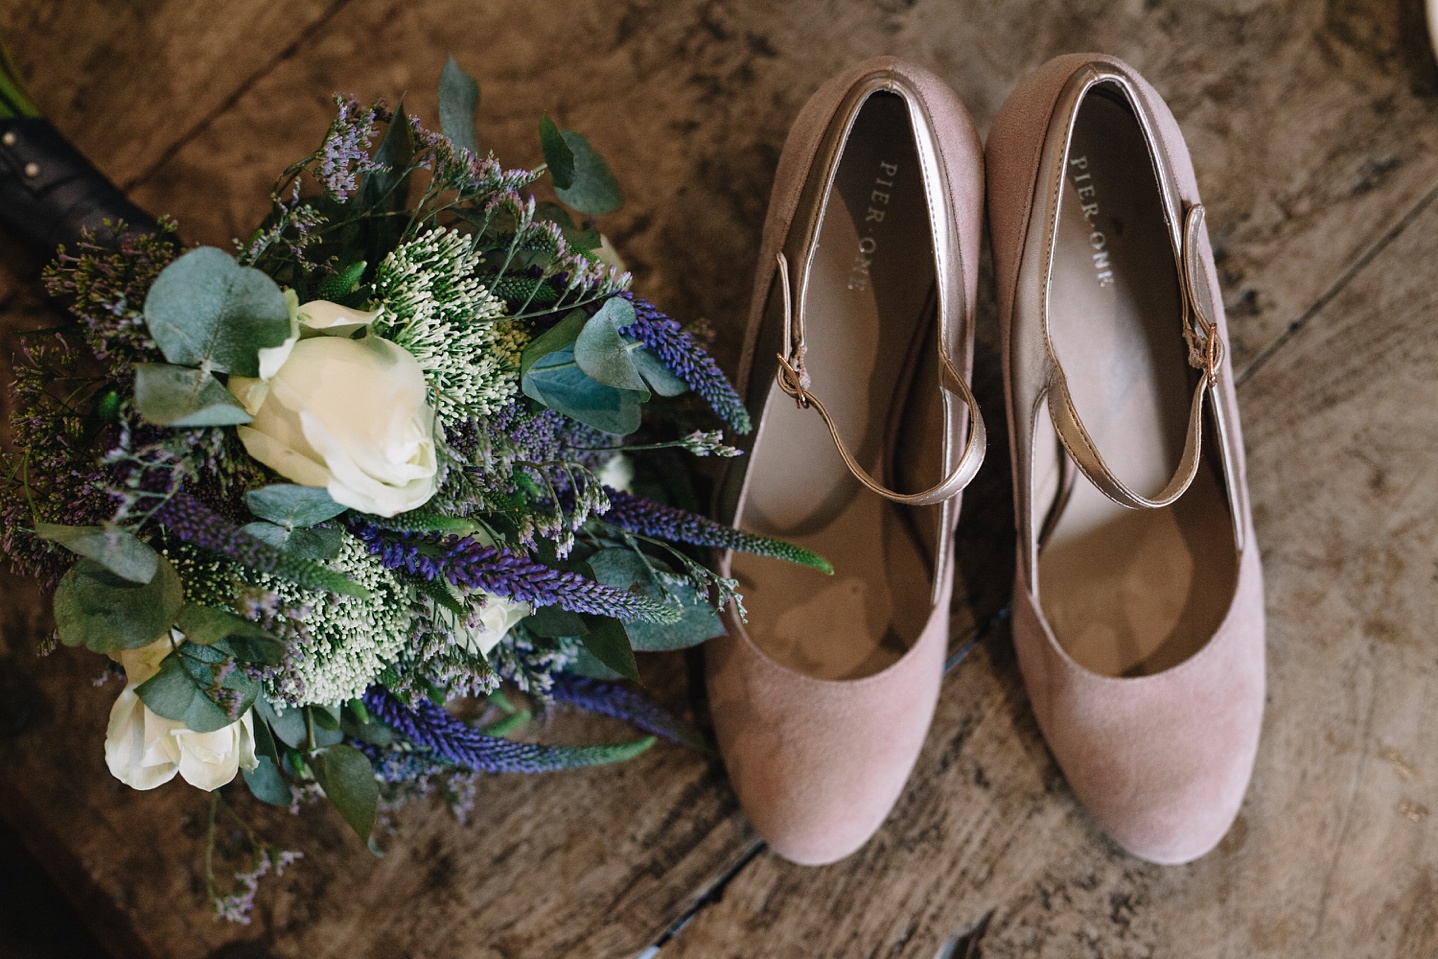 Bridal bouquet and wedding shoes on wooden table